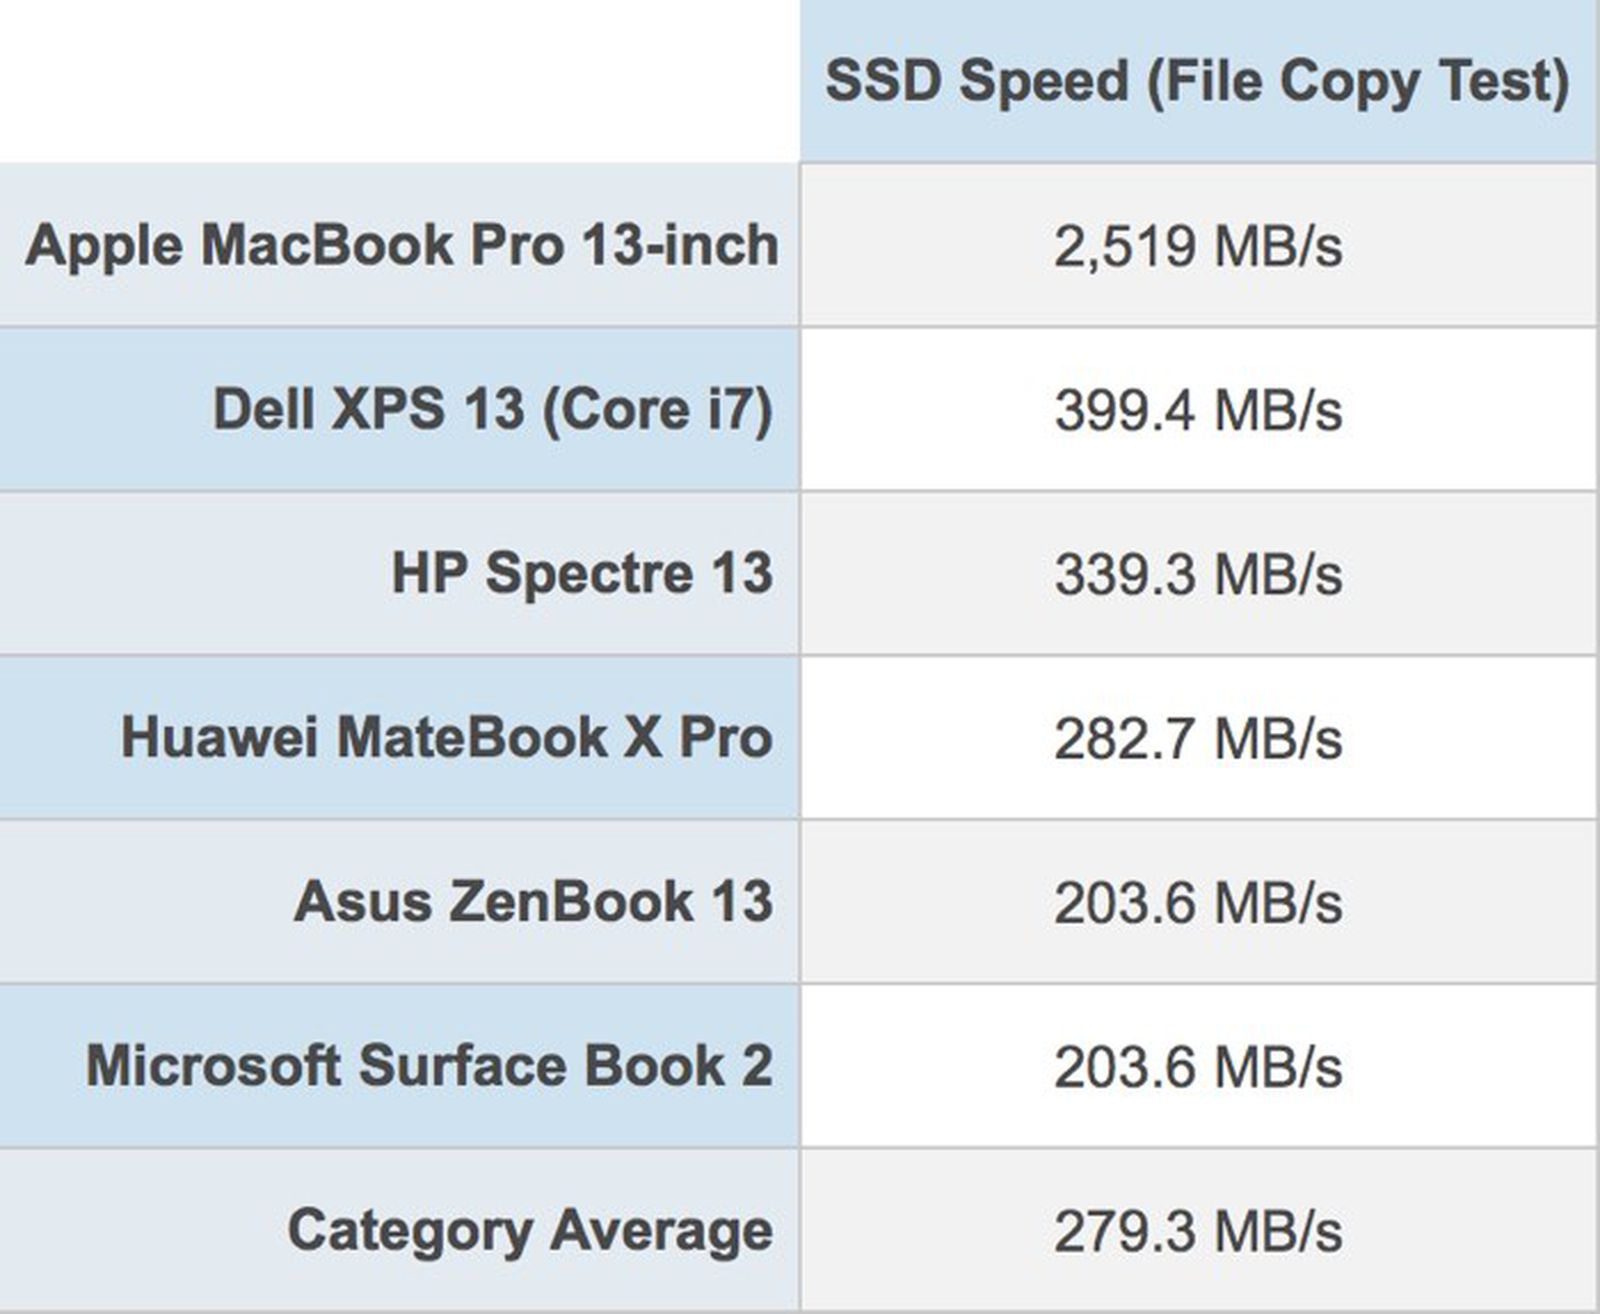 Dripping Shuraba Tilskud 2018 MacBook Pro Features 'Fastest SSD Ever' in a Laptop According to  Benchmarks - MacRumors